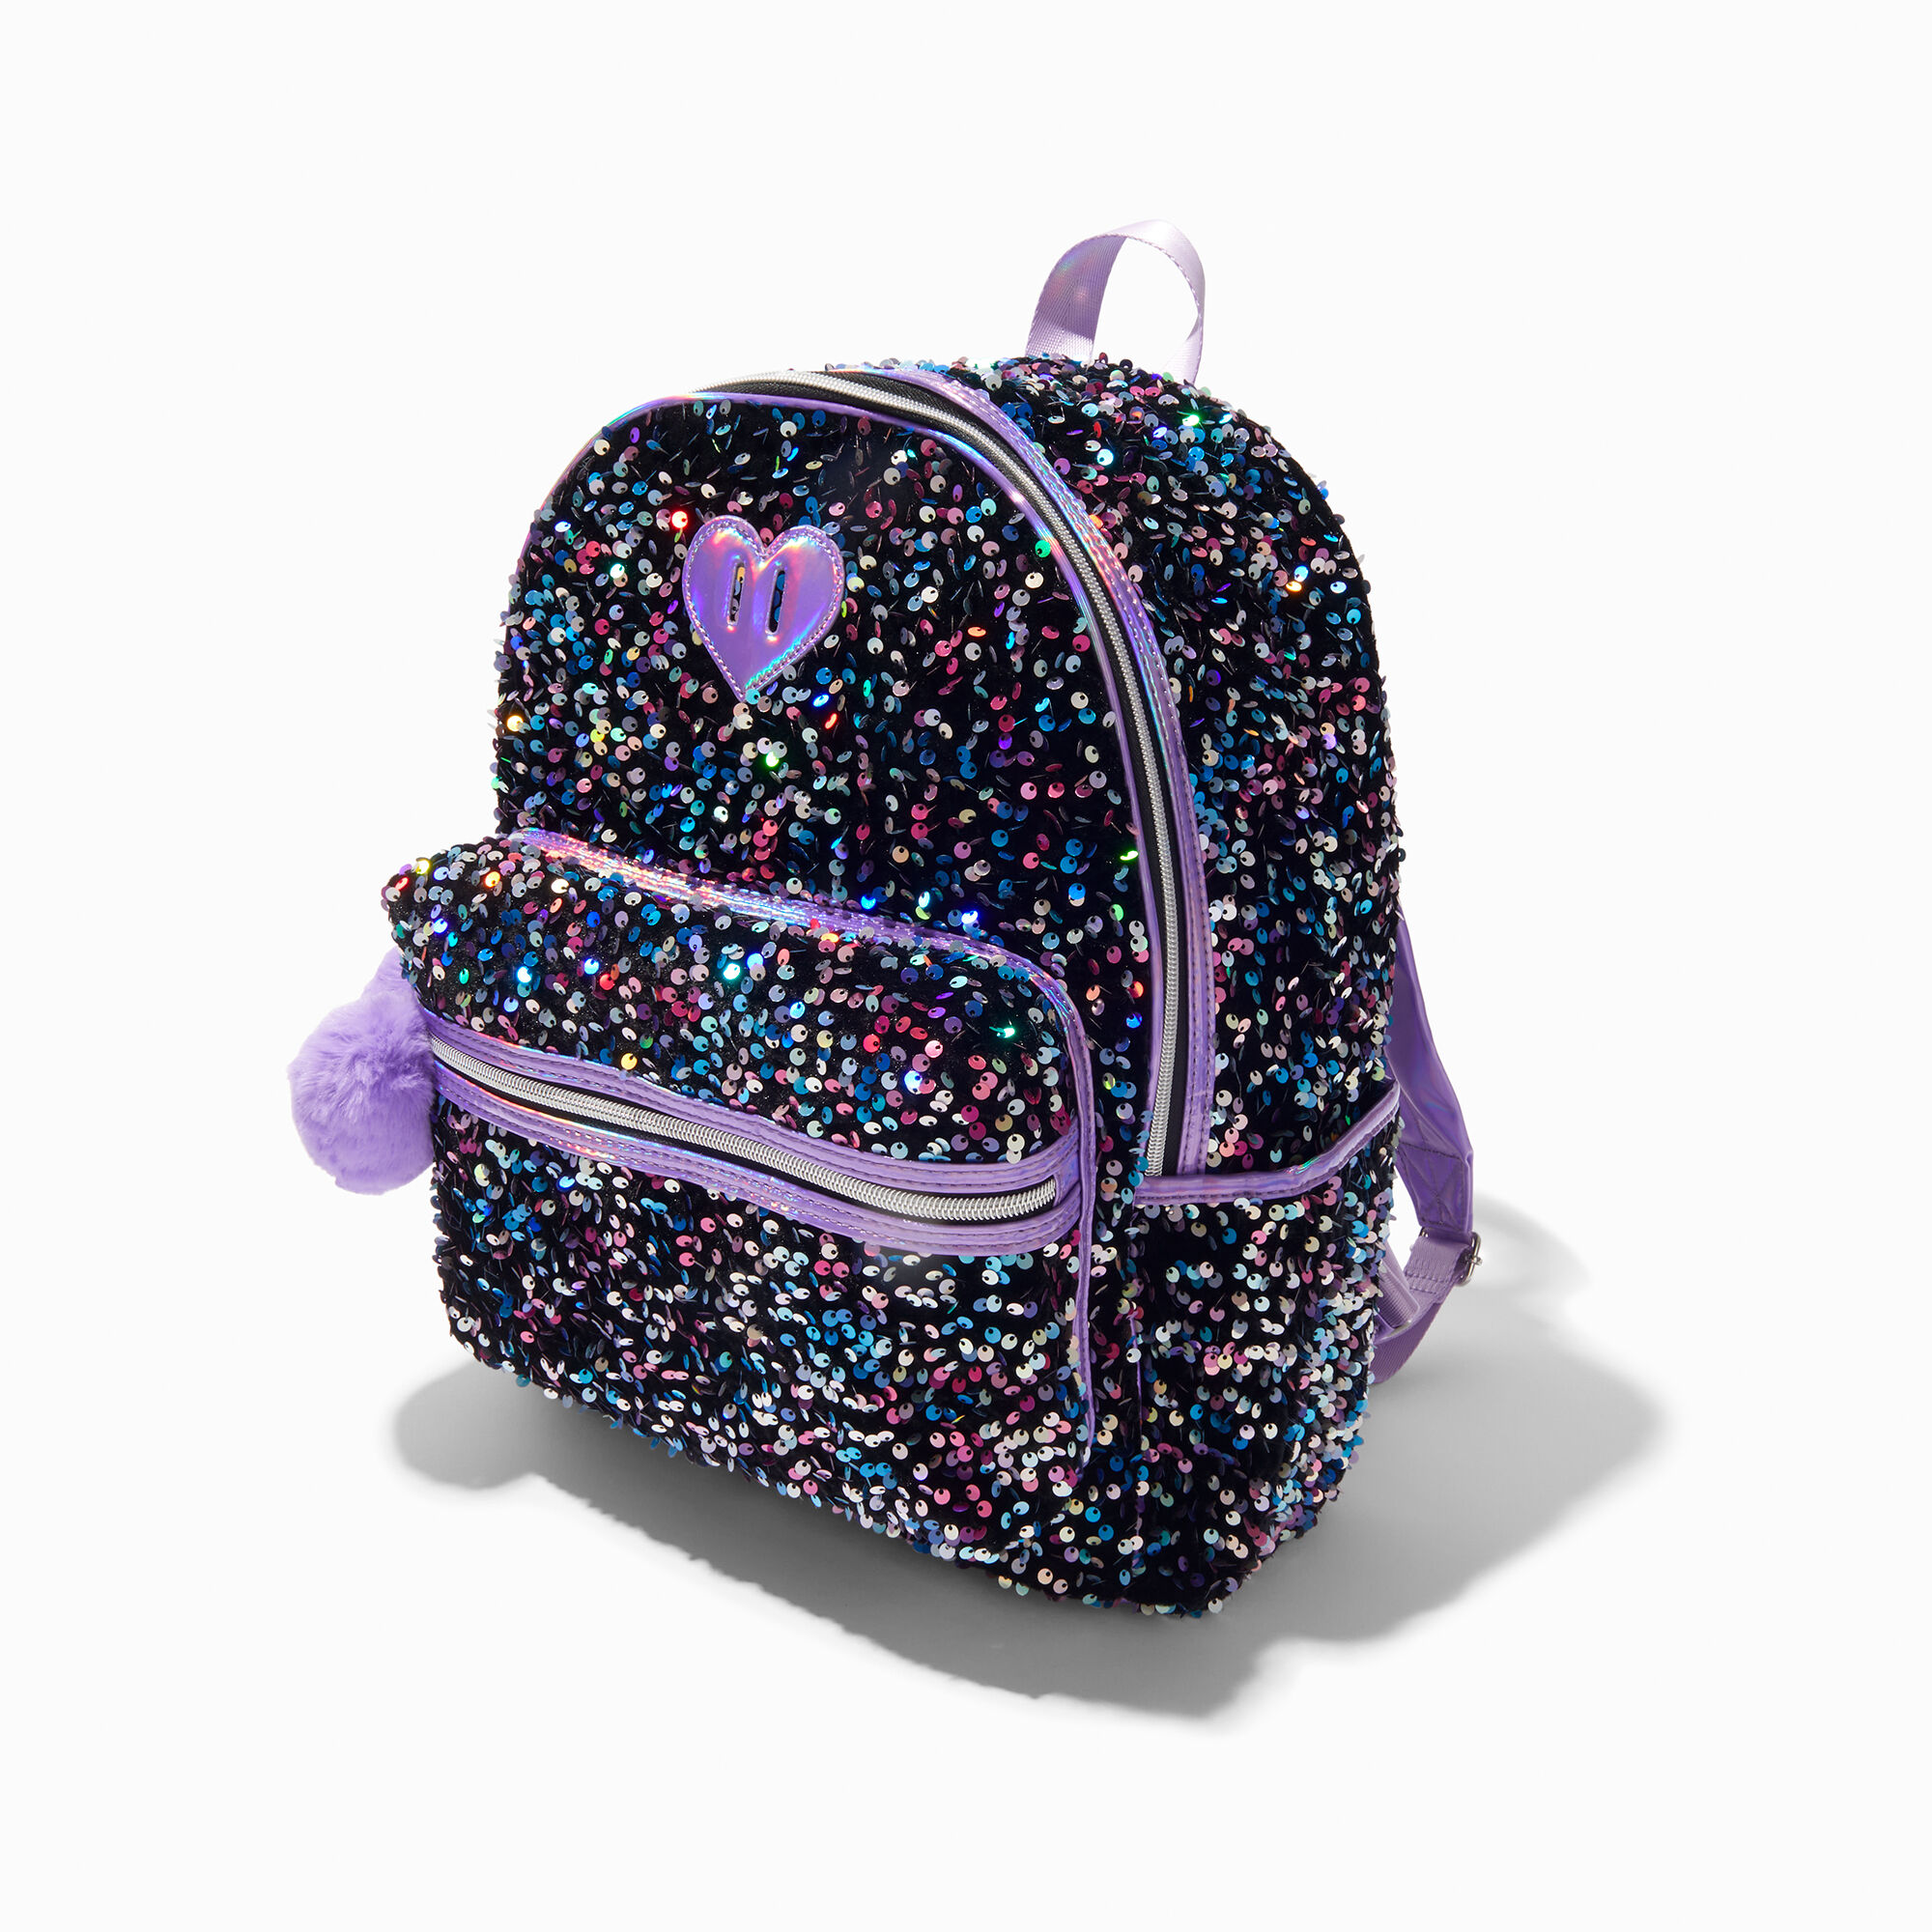 View Claires Sequin Glitter Mini Backpack Purple information